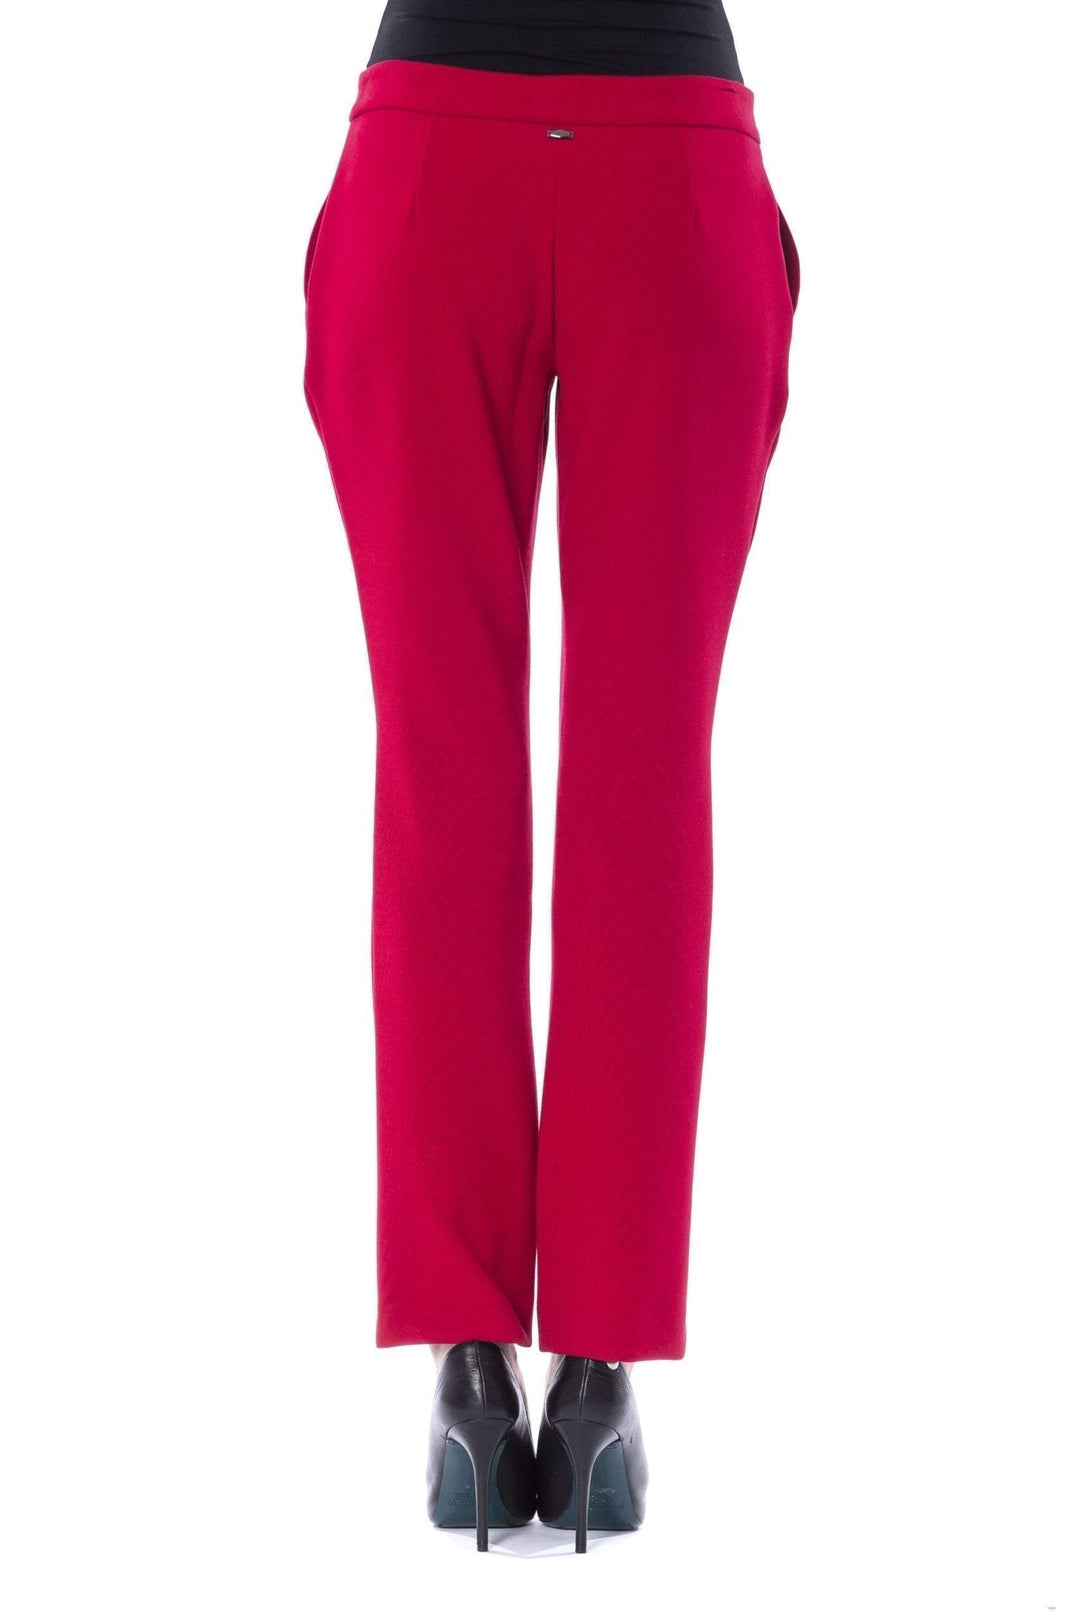 BYBLOS hook closure Jeans & Pant #women, BYBLOS, feed-agegroup-adult, feed-color-Fuchsia, feed-gender-female, Fuchsia, IT42 | S, IT44 | M, IT46 | L, Jeans & Pants - Women - Clothing at SEYMAYKA